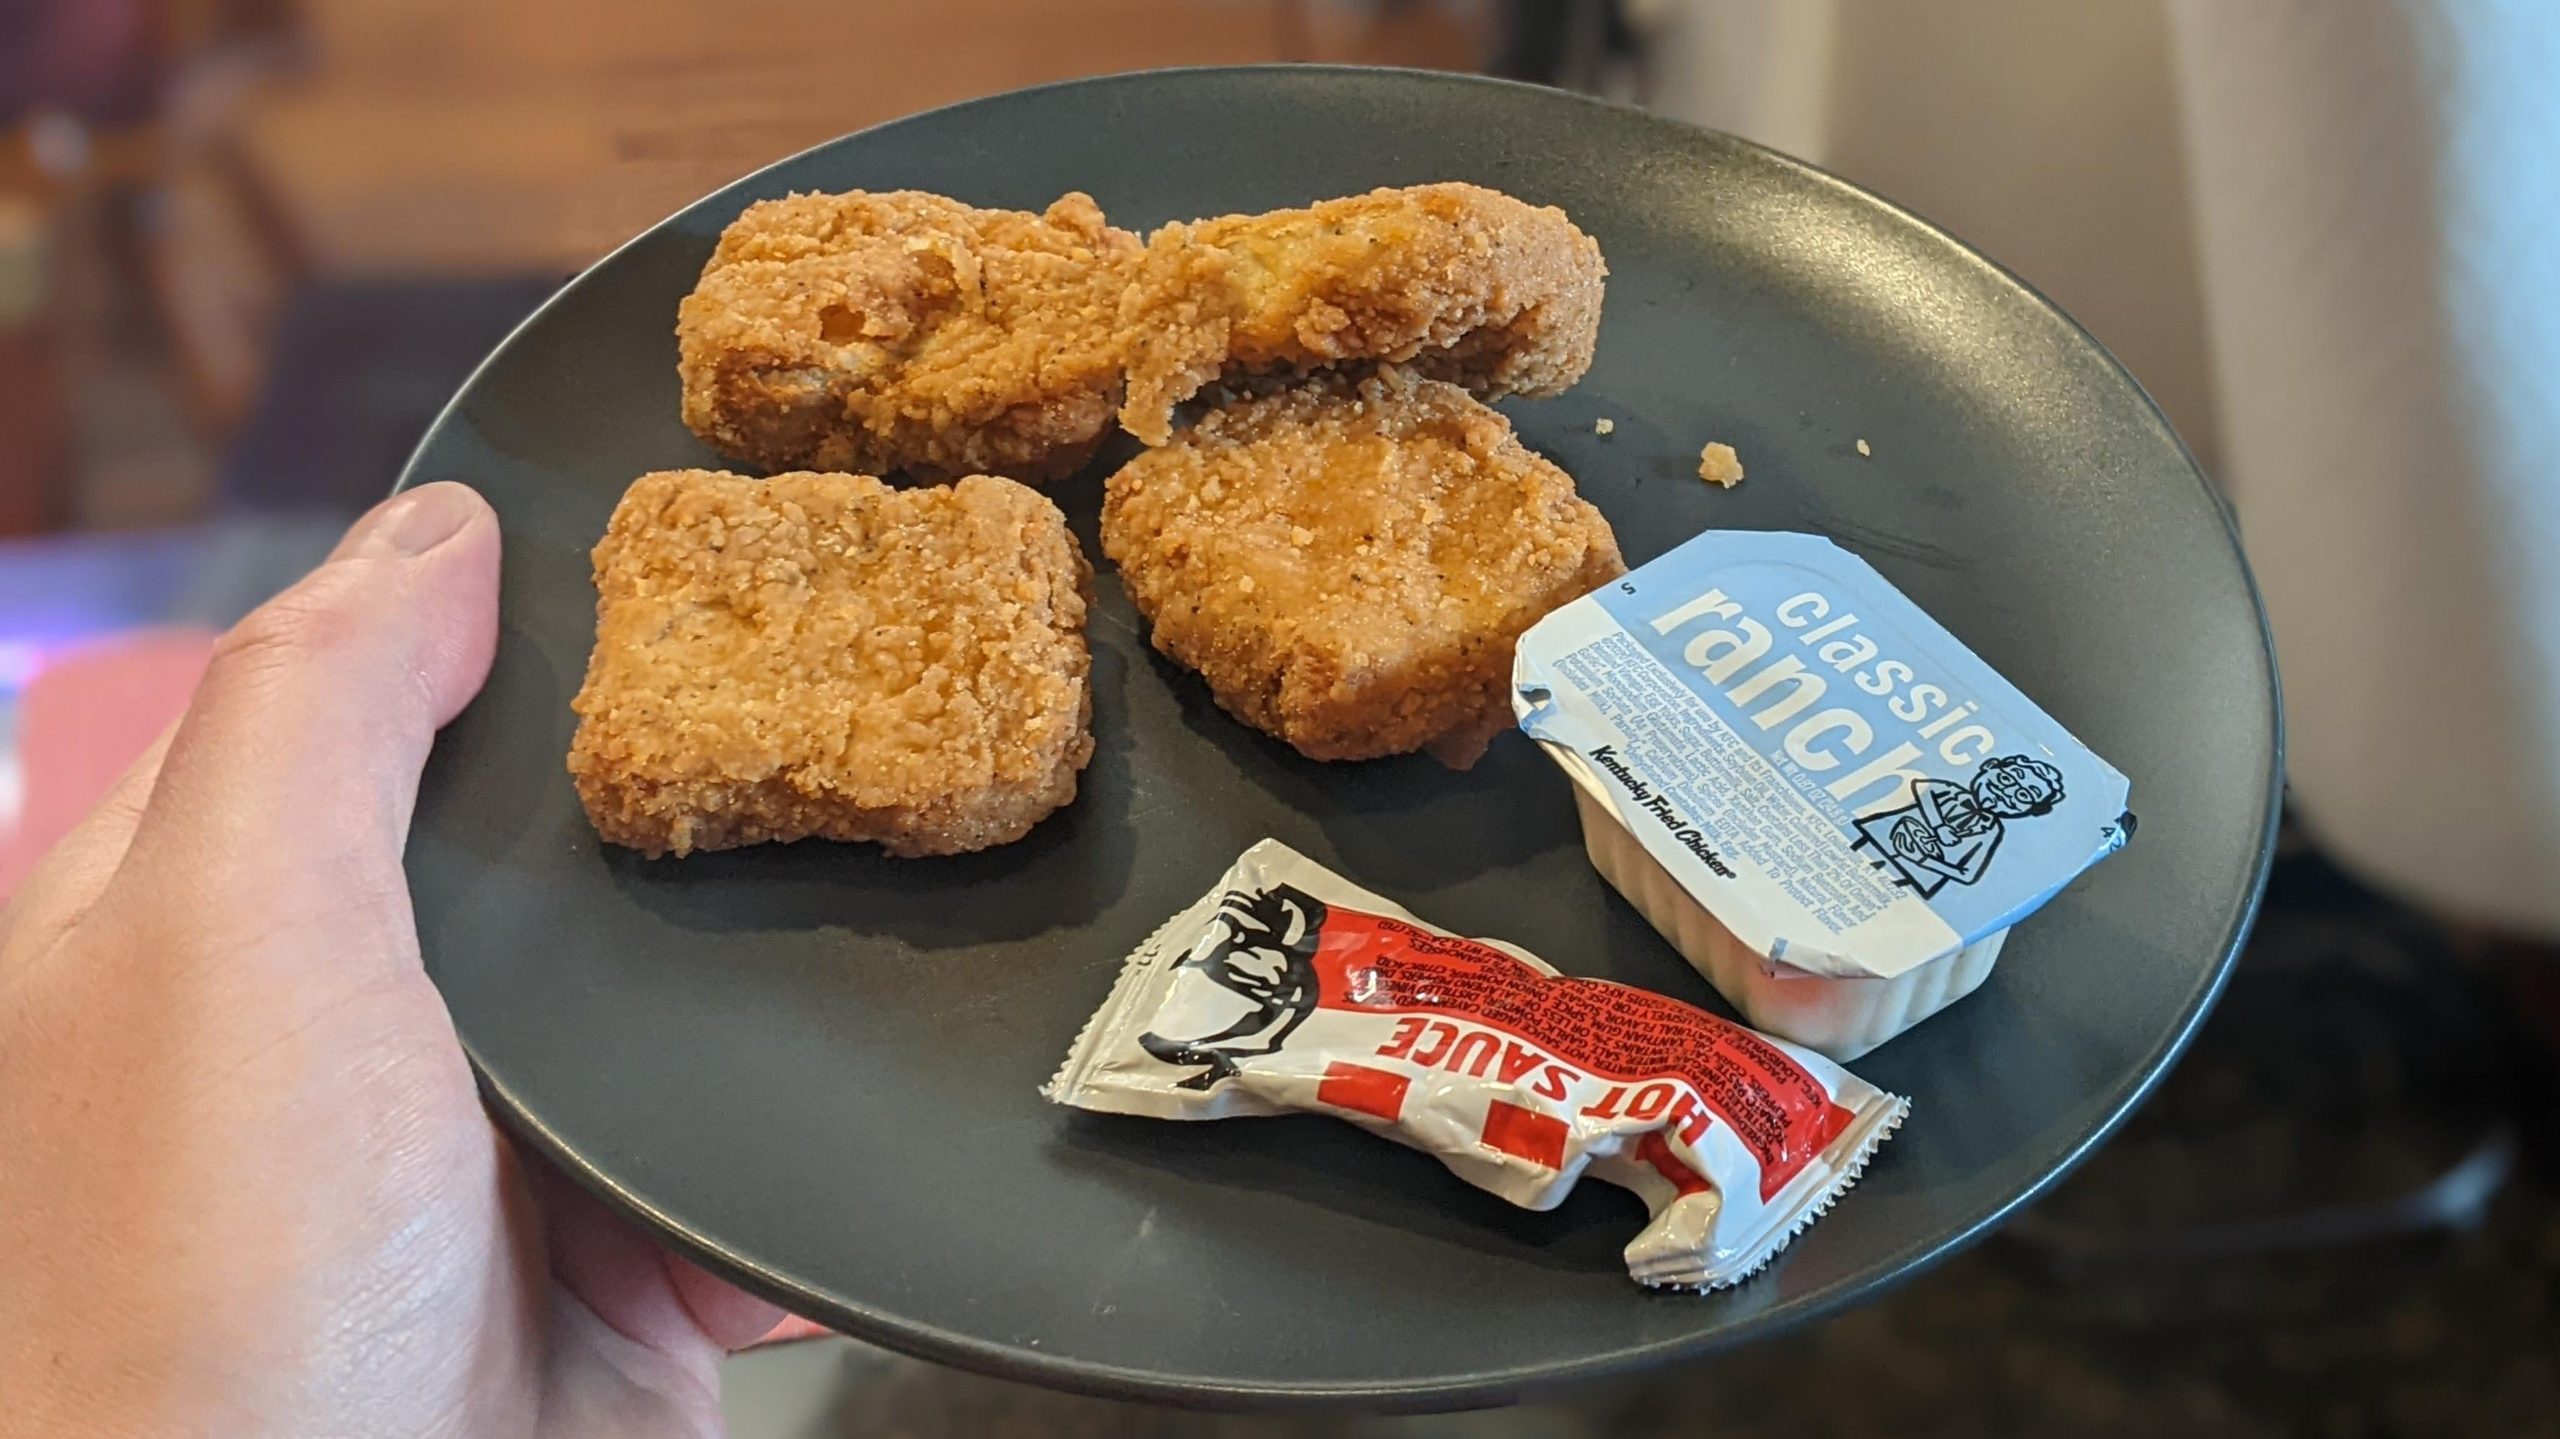 KFC's Beyond Fried Chicken. They're just a little square. (Photo: Tom McKay / Gizmodo)